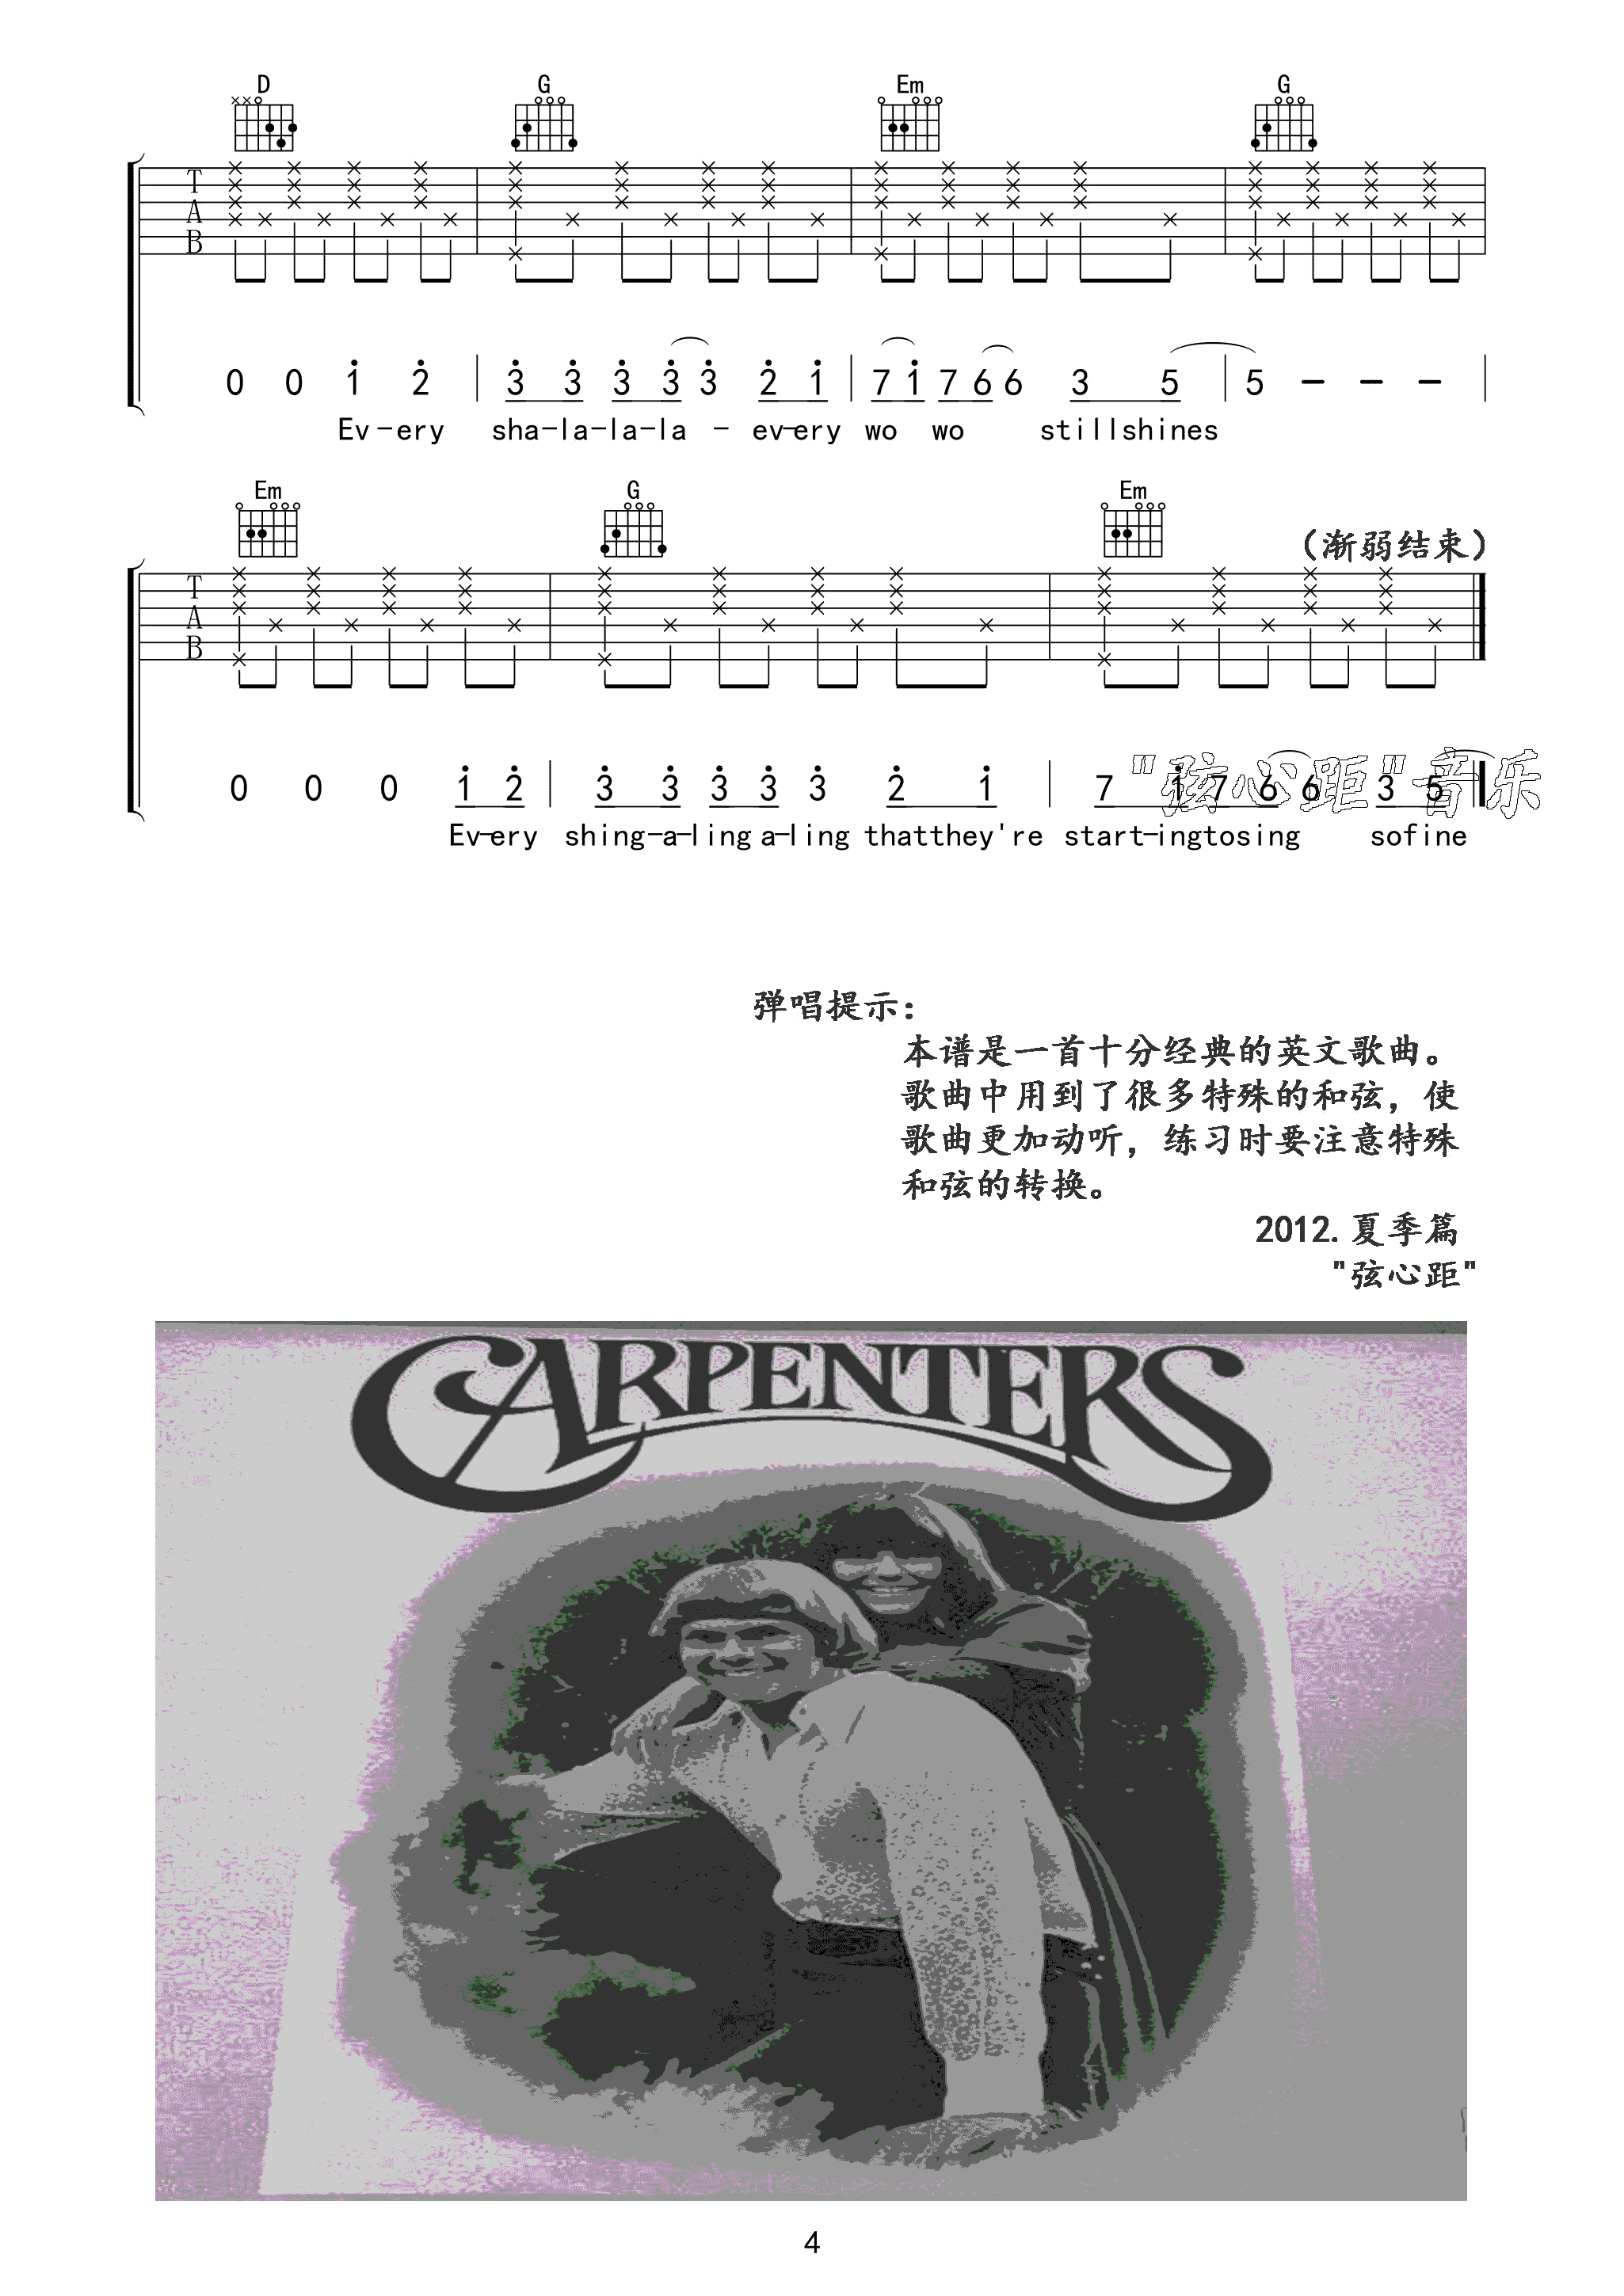 Yesterday_Once_More吉他谱_G调高清版_弦心距编配_carpenters